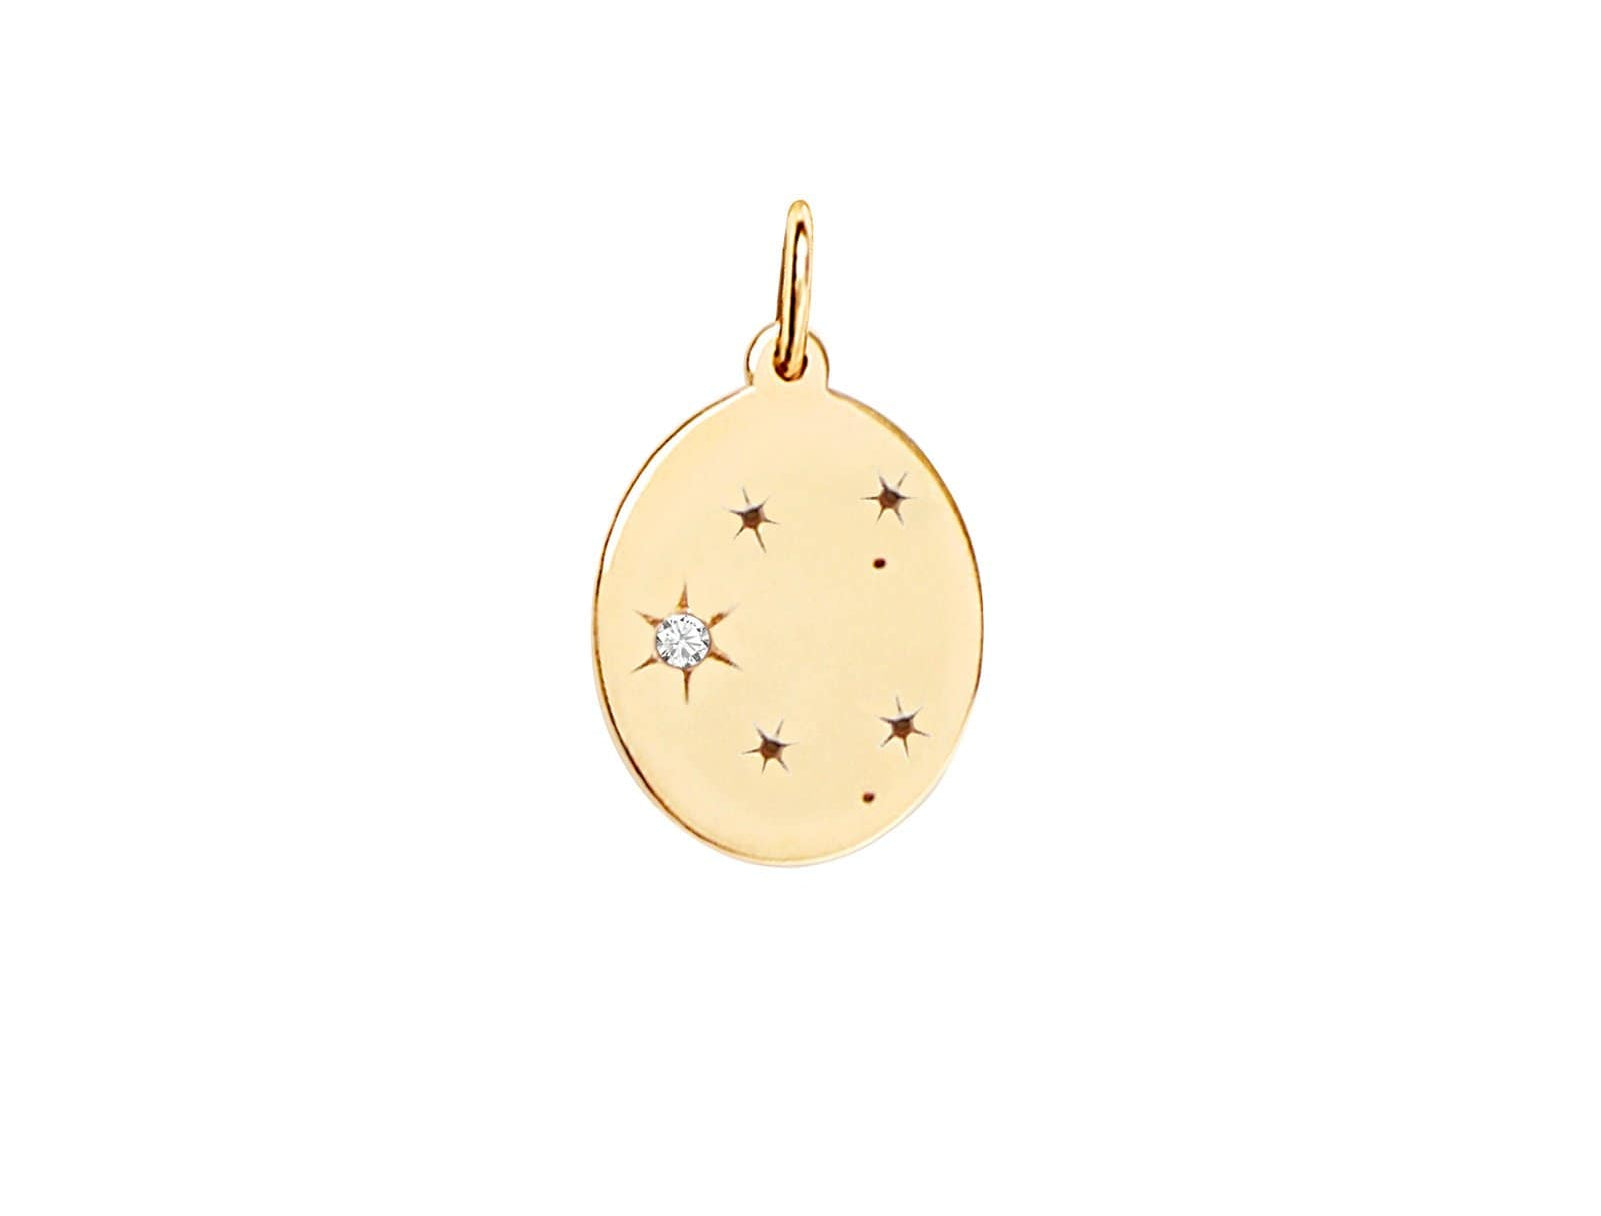 Picture of  Luna Rae solid 9k gold Stars of Libra